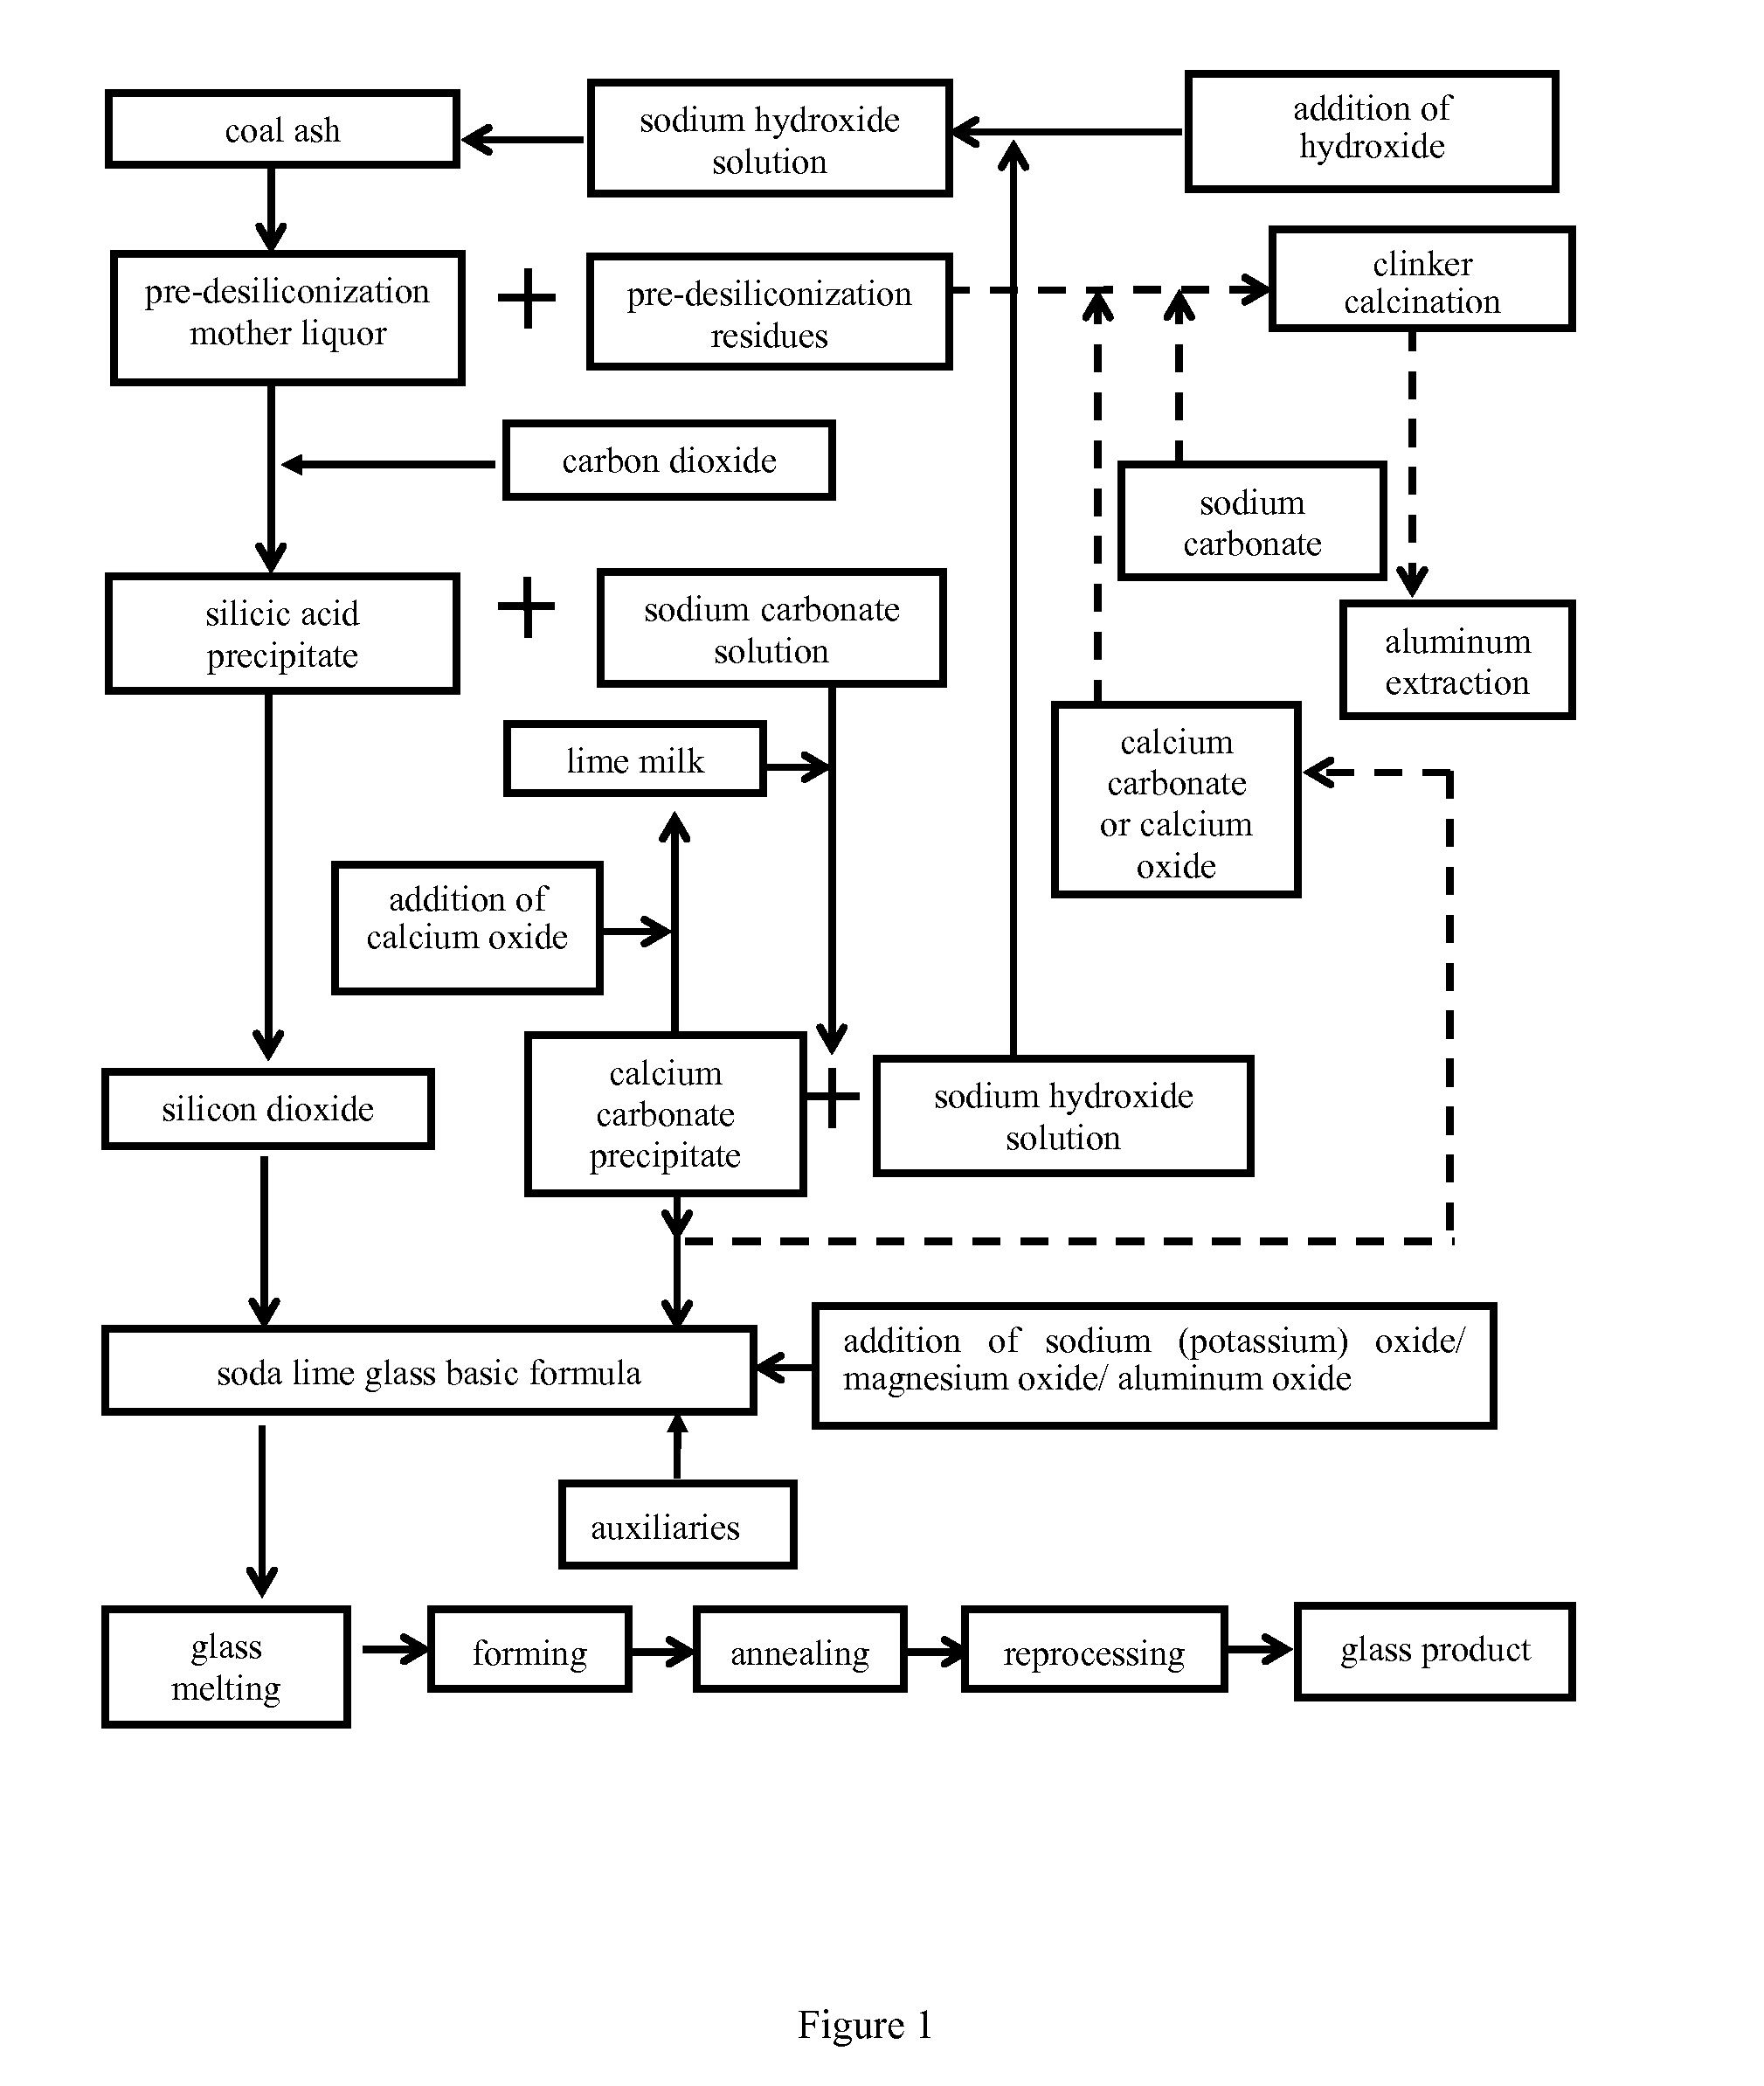 Method for Preparing a Soda-Lime-Silica Glass Basic Formulation and a Method for Extracting Aluminum from Coal Ash for Co-Production of Glass